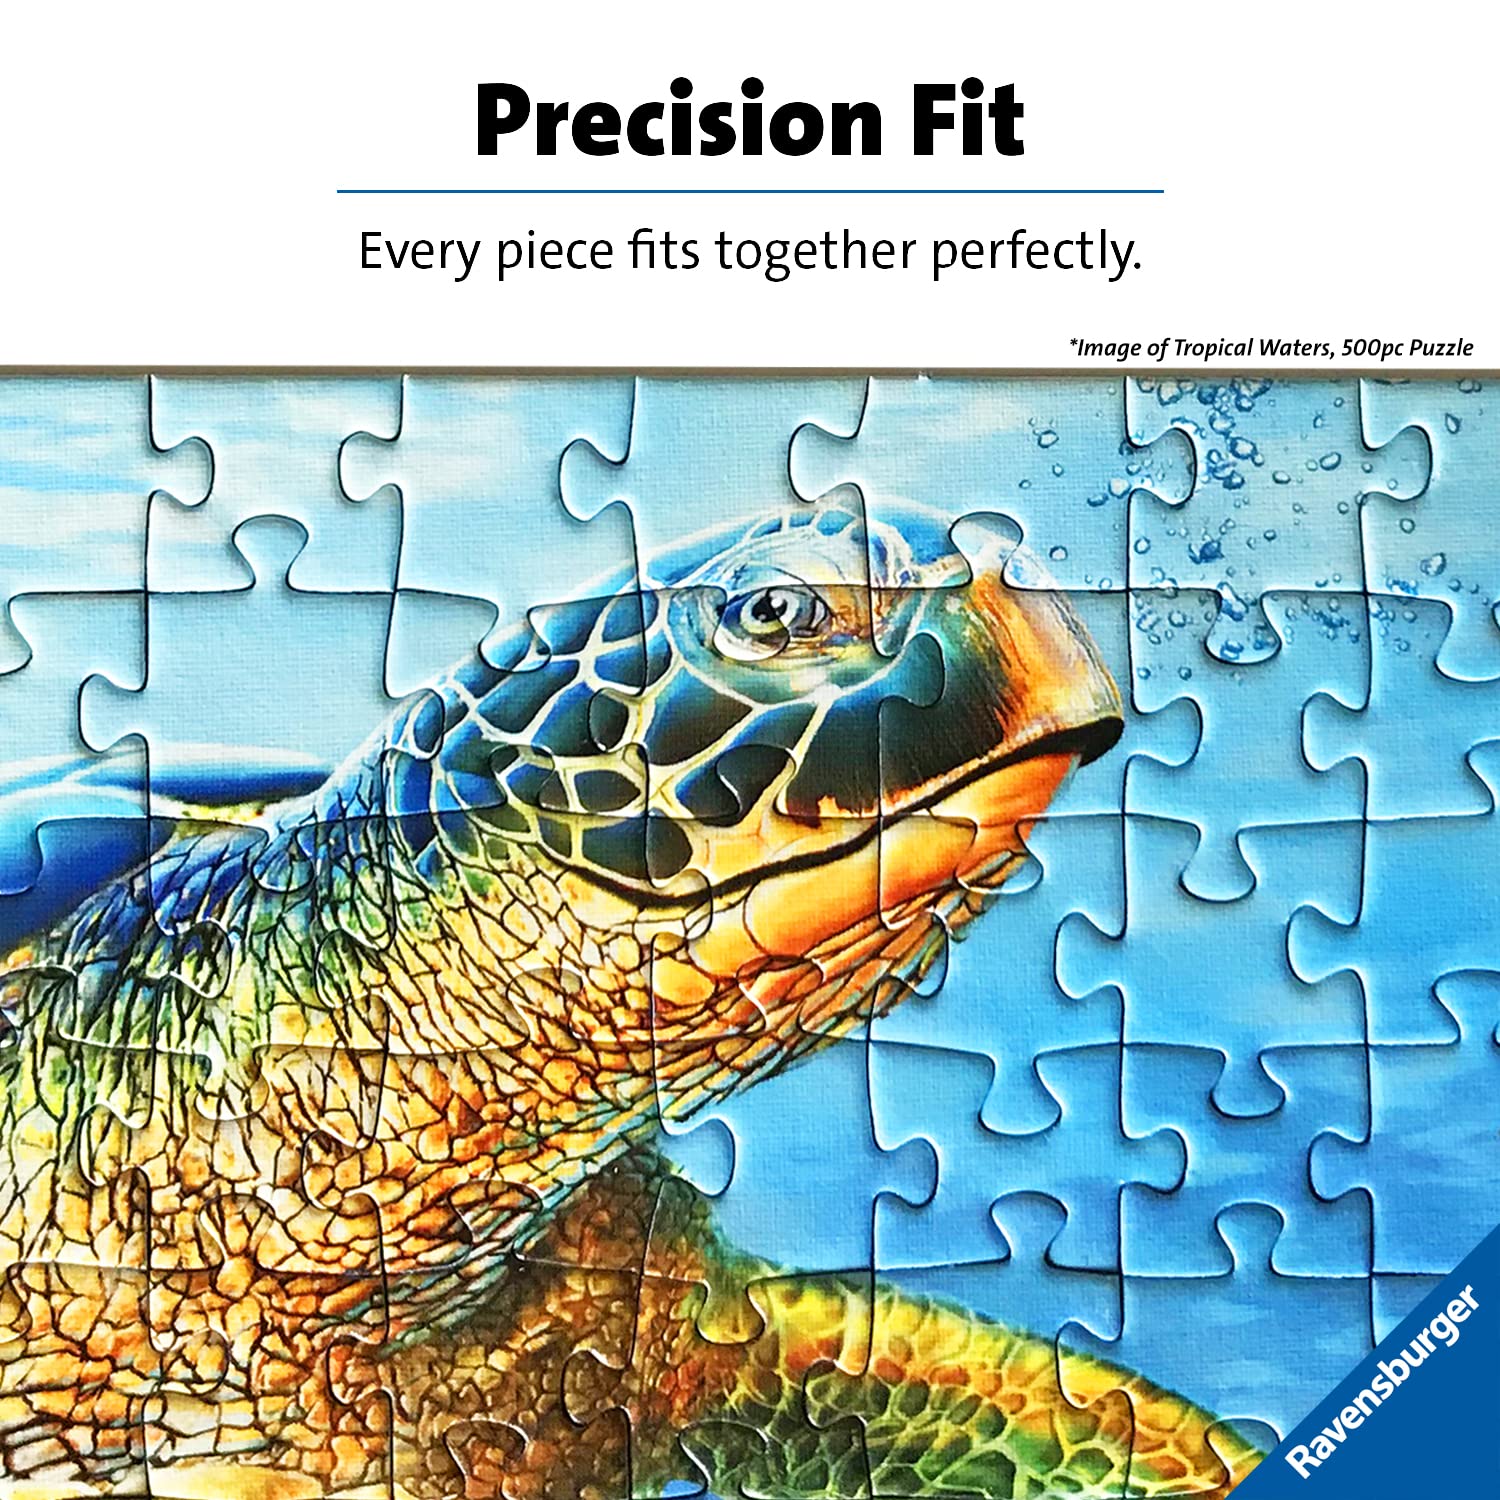 Ravensburger Constellations 2000 Piece Jigsaw Puzzle for Adults - 17440 - Every Piece is Unique, Softclick Technology Means Pieces Fit Together Perfectly